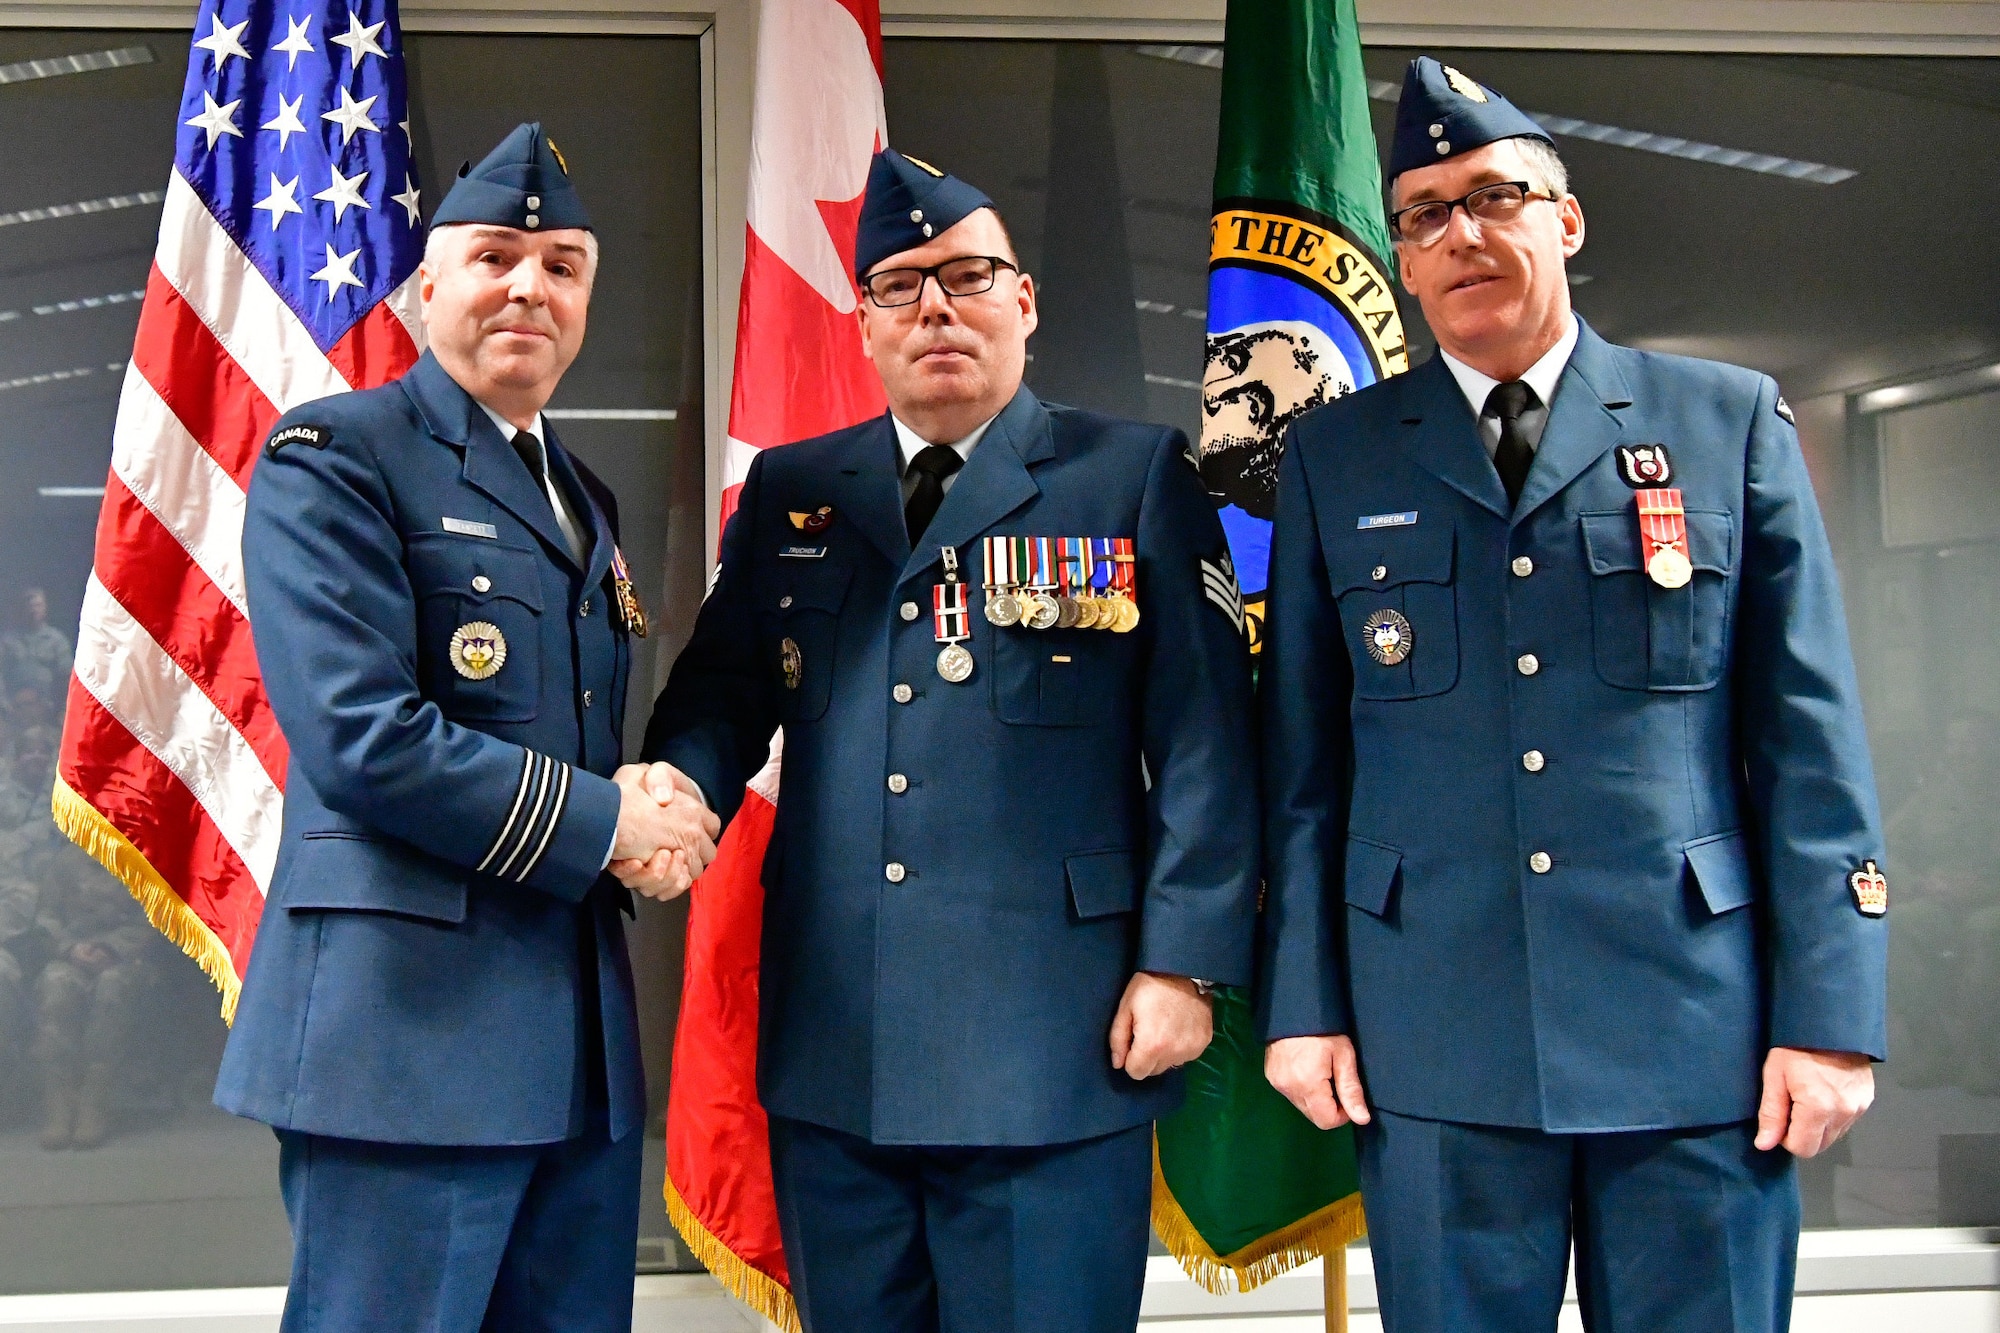 Royal Canadian Air Force Sgt. Yves Truchon (center), Western Air Defense Sector Canadian Detachment command and control battle manager, is awarded the Canadian Armed Forces Special Service Medal with NATO bar from Lt. Col. Michael Fawcett, WADS Canadian Detachment commander (left), Dec. 1, 2018 at Joint Base Lewis-McChord, Washington.  The medal was awarded for Truchon’s exceptional service conducting operations as part of Task Force 2011 (409th Fighter Squadron) and Task Force 2013 (425th Fighter Squadron) during Operation Ignition, the RCAF contribution to the NATO air policing mission over Iceland, providing airborne surveillance and interception capabilities to meet Iceland’s peacetime preparedness needs. The Special Service Medal was created to recognize members of the Canadian Armed Forces who have performed a service determined to be under exceptional circumstances, in a clearly defined locality for a specified duration.  The SSM is always issued with a bar that specifies the special service being recognized, each bar having its own criteria. (U.S. Air National Guard photo by Maj. Kimberly D. Burke)